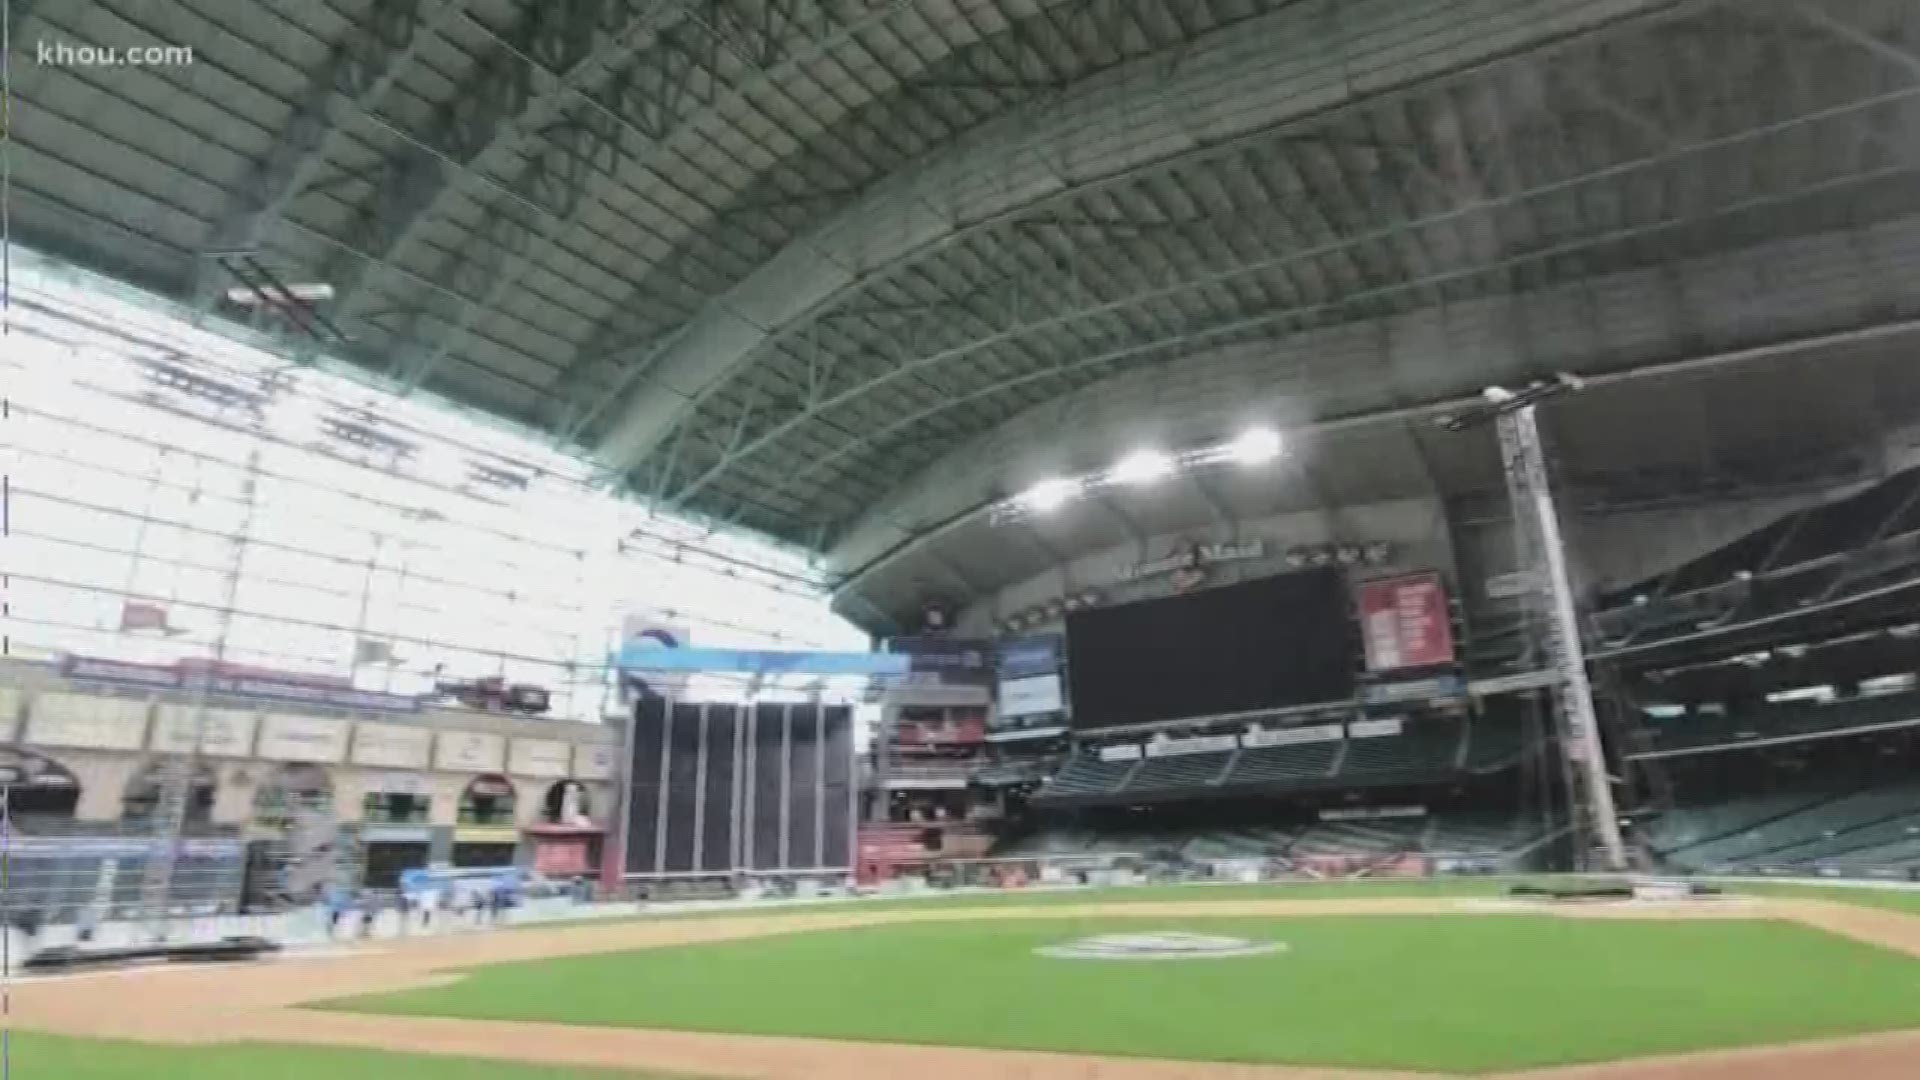 It's one of the more recognizable spots in Houston - Minute Maid Park, home of the Astros! We've witnessed some pretty thrilling moments inside that stadium.